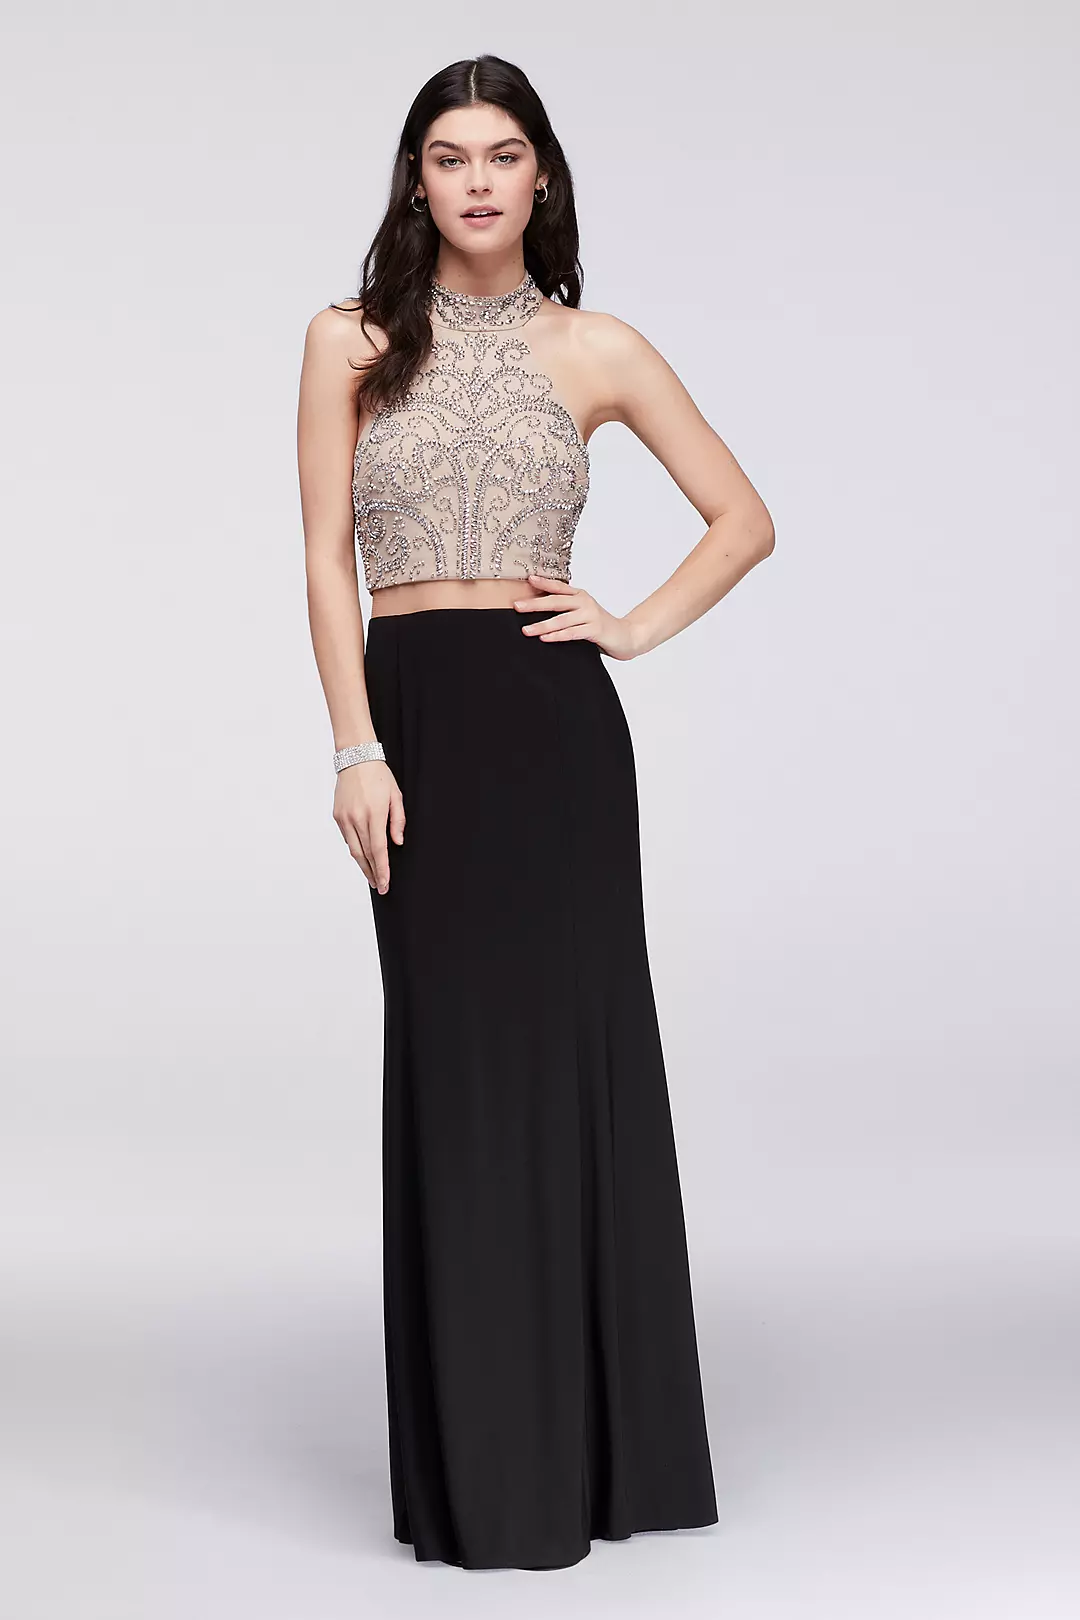 Caviar-Beaded Mesh and Jersey Faux Two-Piece Dress Image